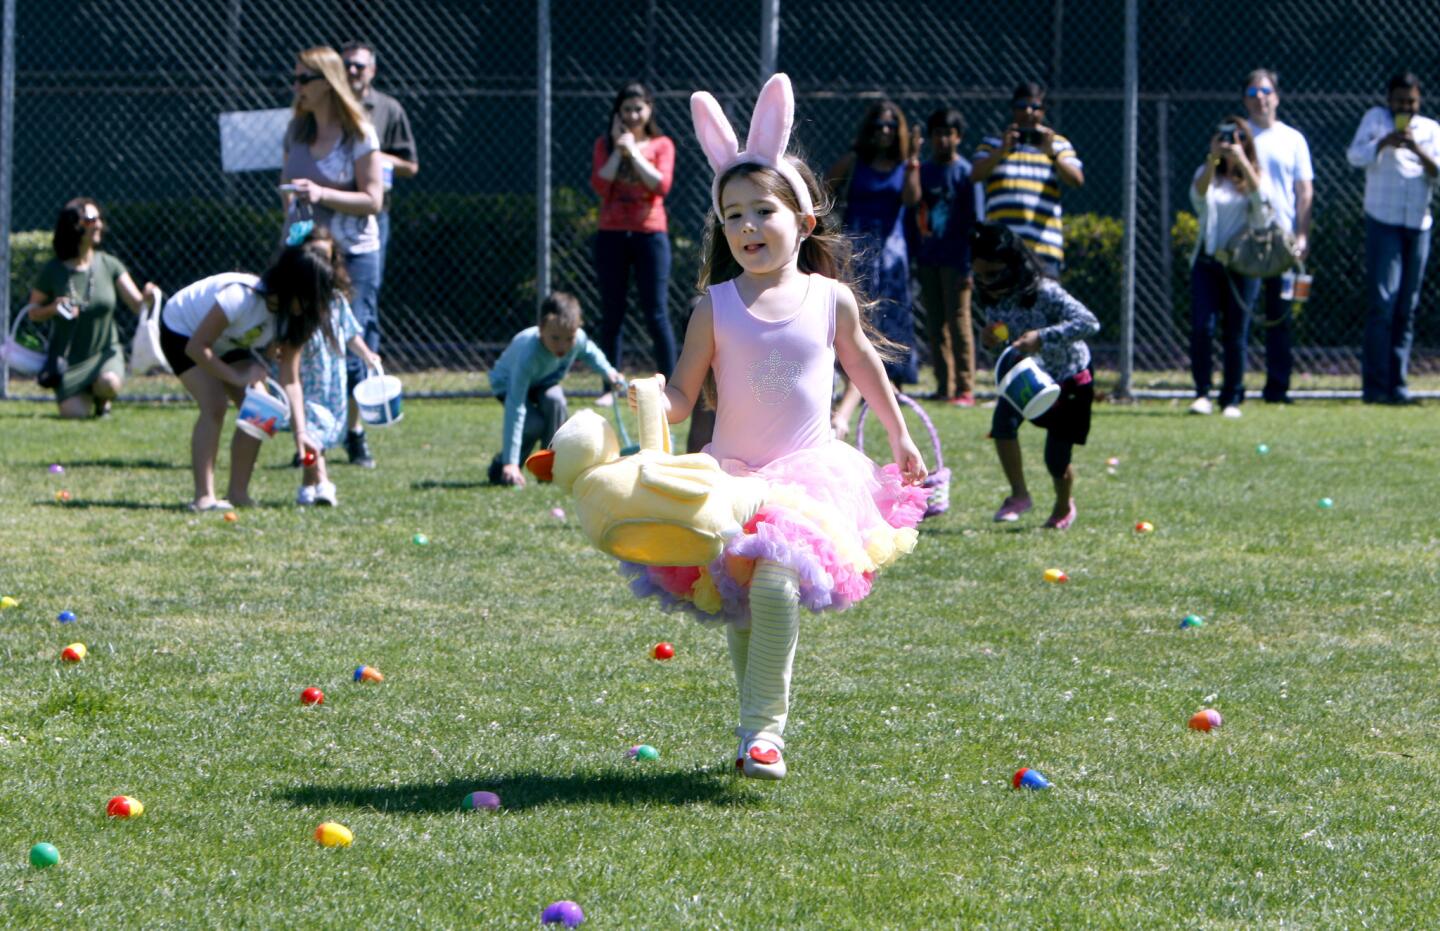 Mia Mahoney, 5 of Burbank, races out to get easter eggs during the annual city of Burbank Spring Egg-Stravaganza at McCambridge Park in Burbank on Saturday, April 15, 2017. The free egg hunts included 2 for four year olds and under and 2 for 5-10 year old children. The event also included mascot meet and greet, bounce houses, games, prizes and pictures with the Easter bunny.